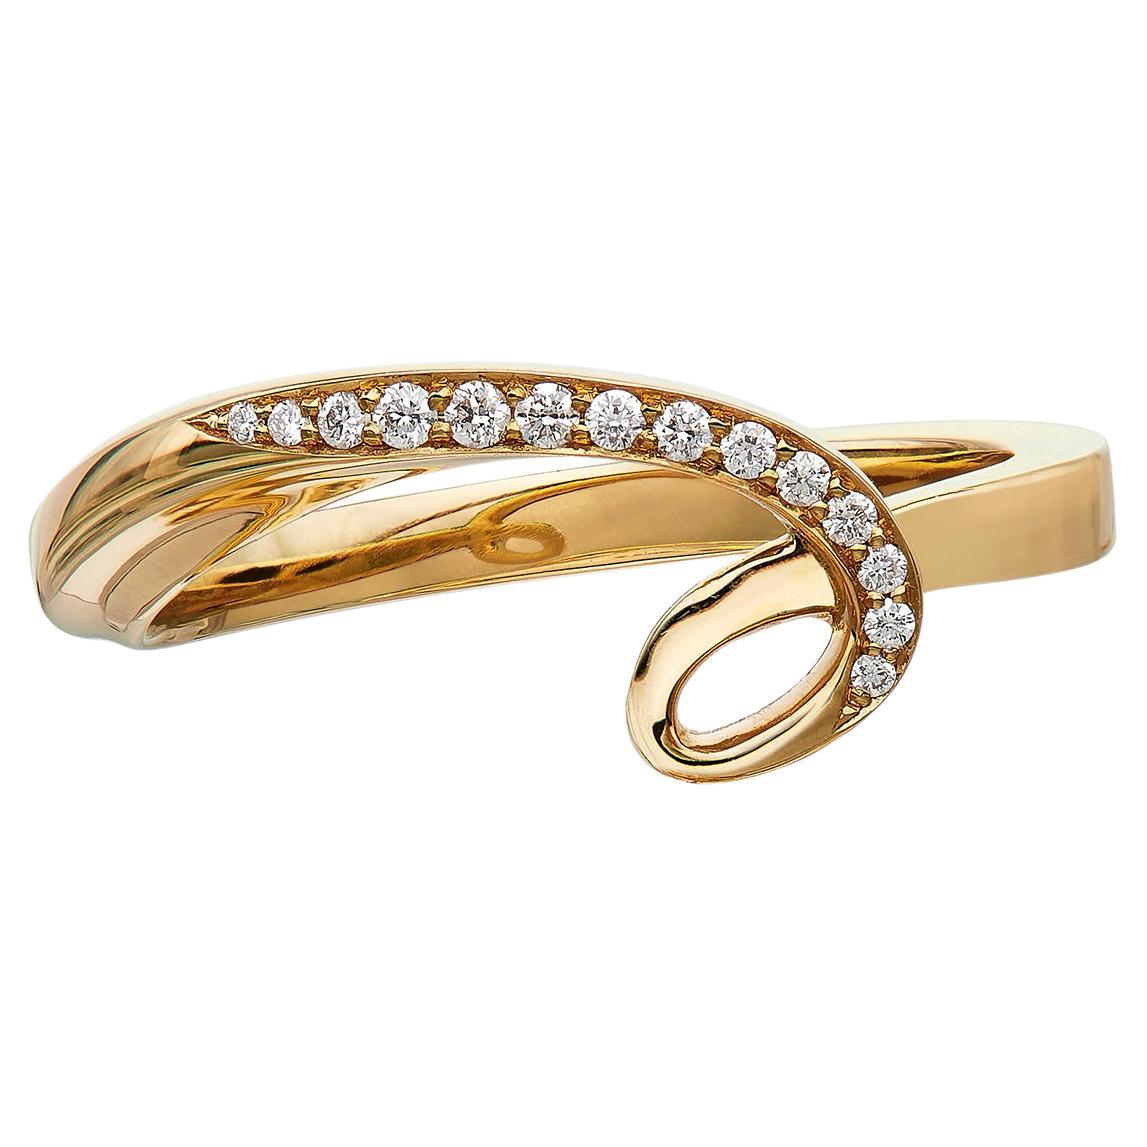 Handcrafted Loop Ring, 18k Gold and Pave Set with Brilliant Cut Diamonds